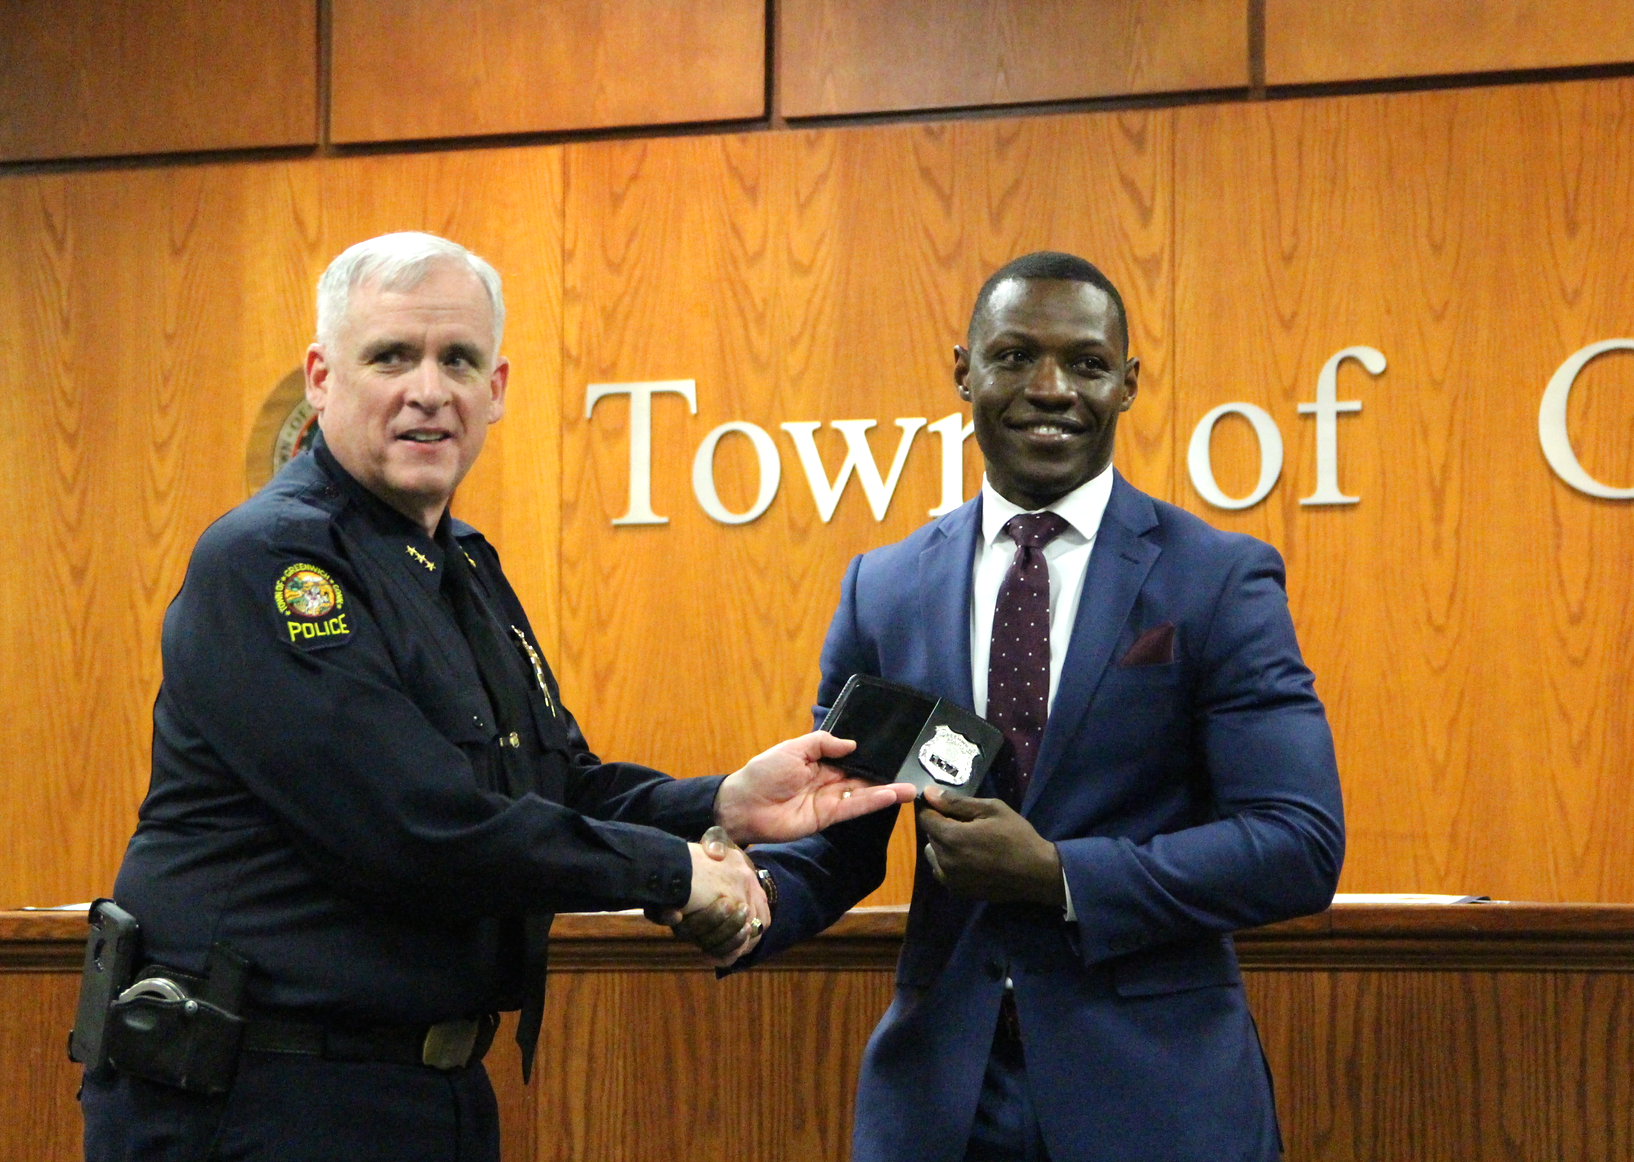 Newly sworn in Officer Vladimir Souffrant receives his badge from Greenwich Police Chief Jim Heavey. April 1, 2019 Photo: Leslie Yager